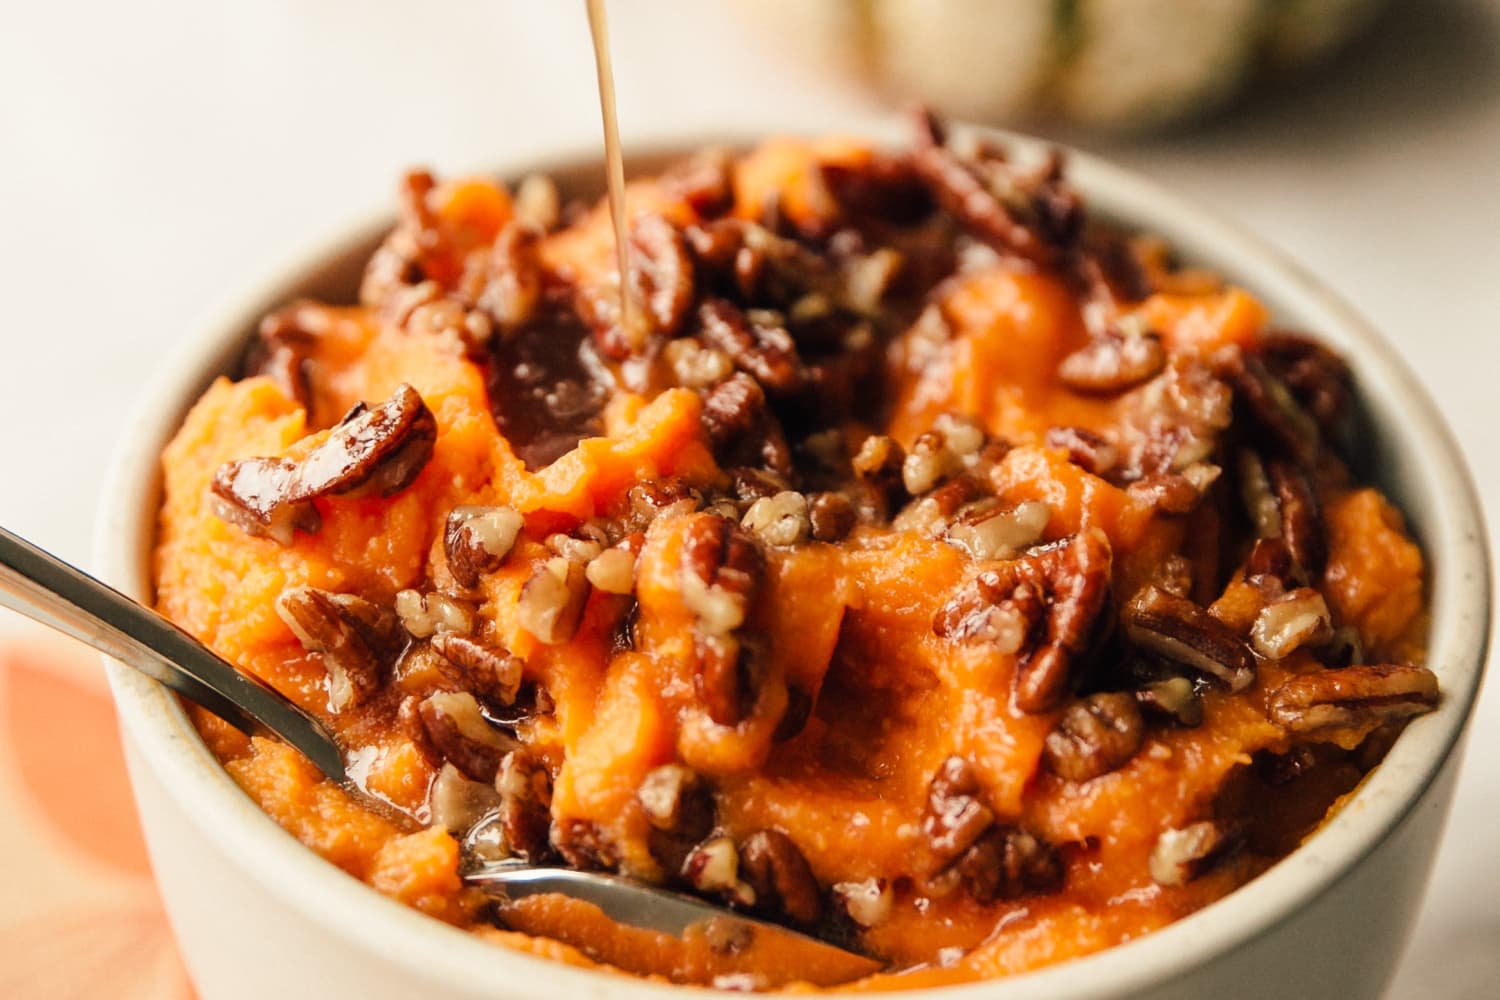 Stovetop Whipped Sweet Potatoes with Maple Pecan Drizzle